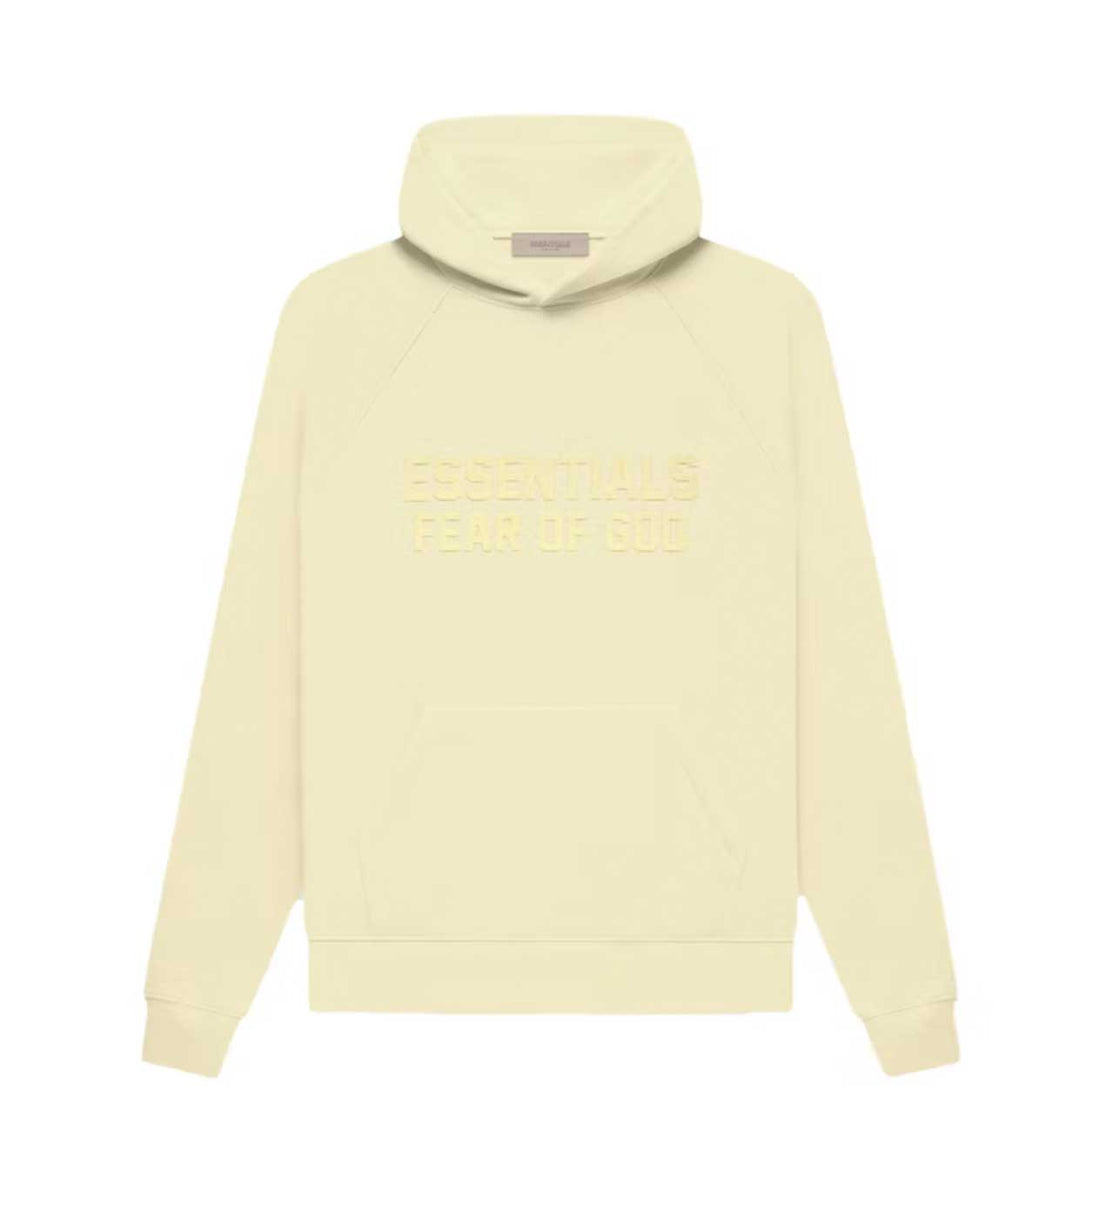 Essentials Canary Yellow Hoodie